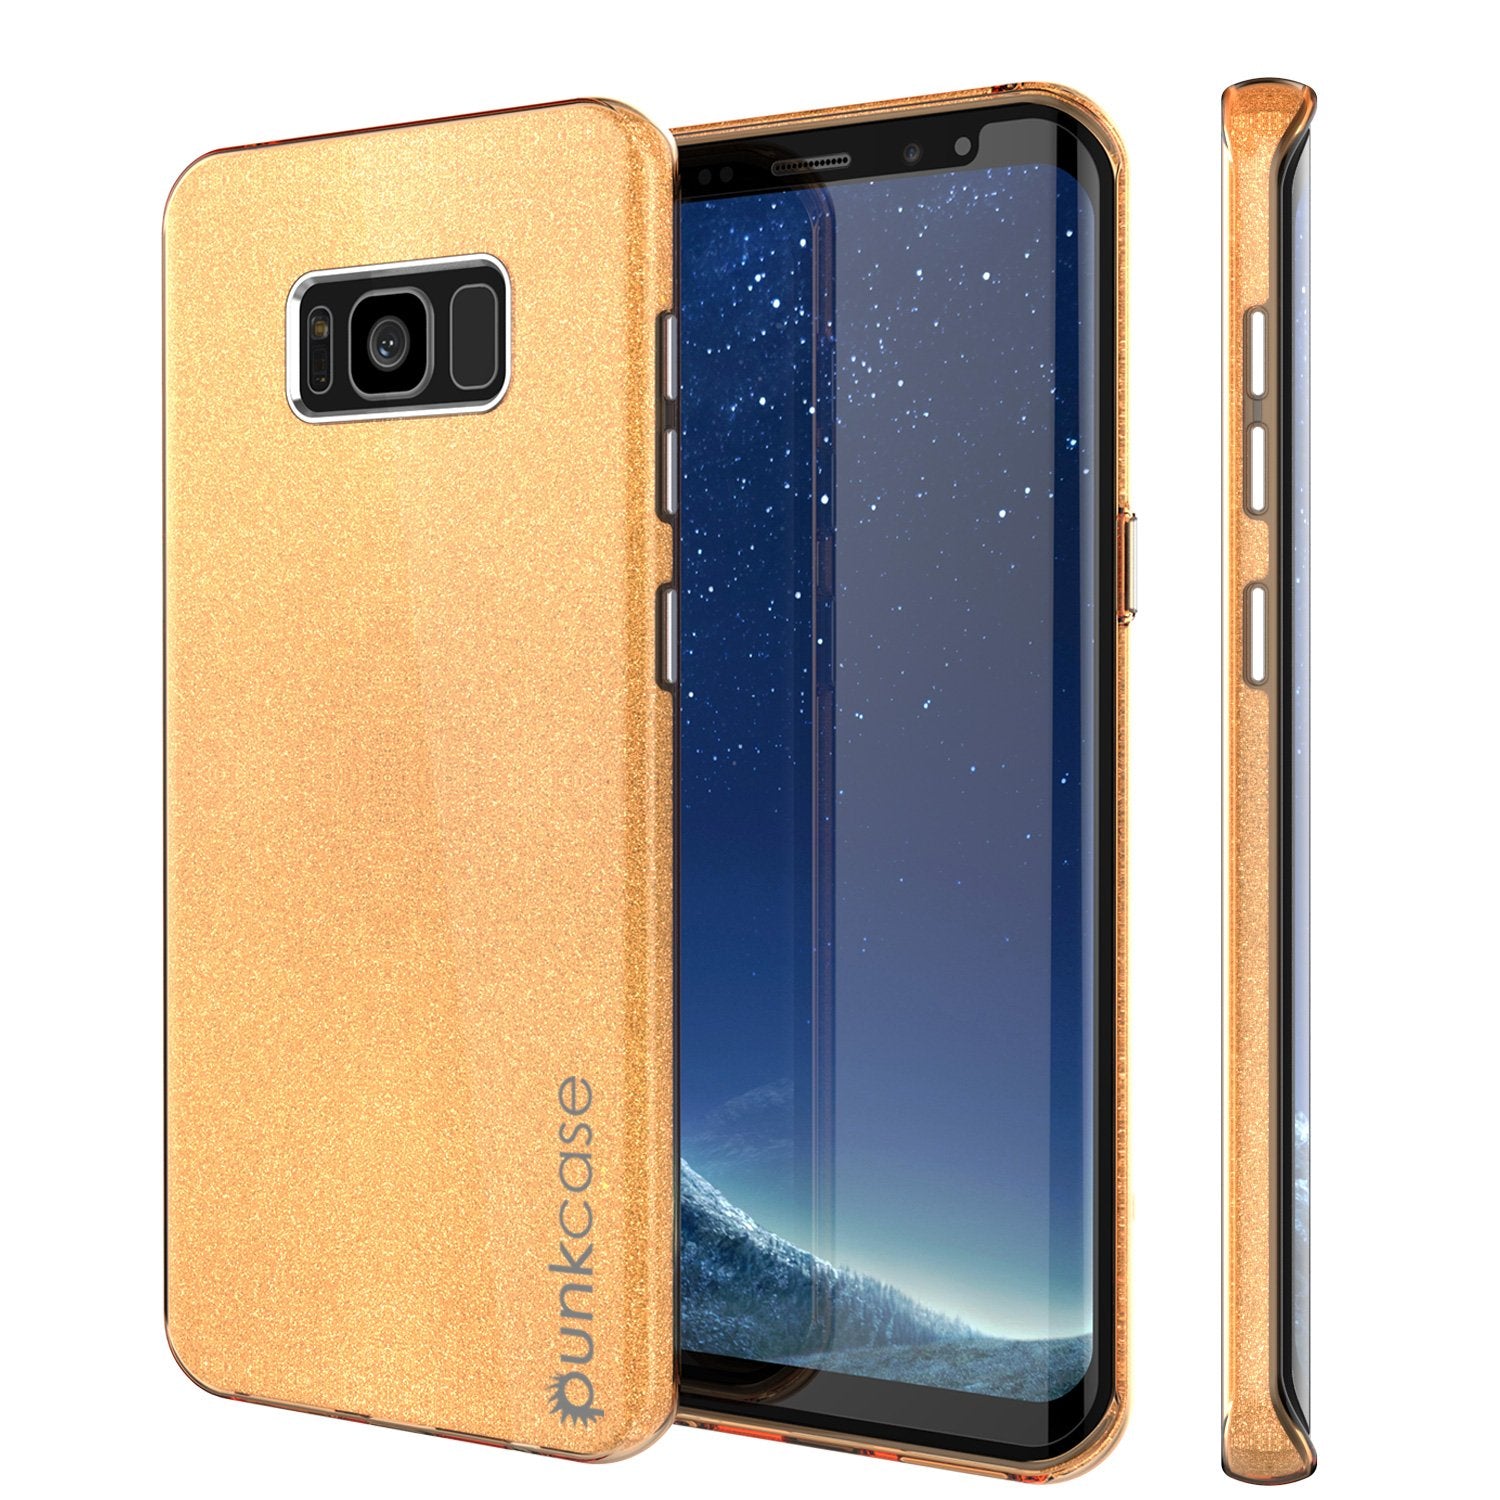 Galaxy S8 Case, Punkcase Galactic 2.0 Series Armor Gold Cover